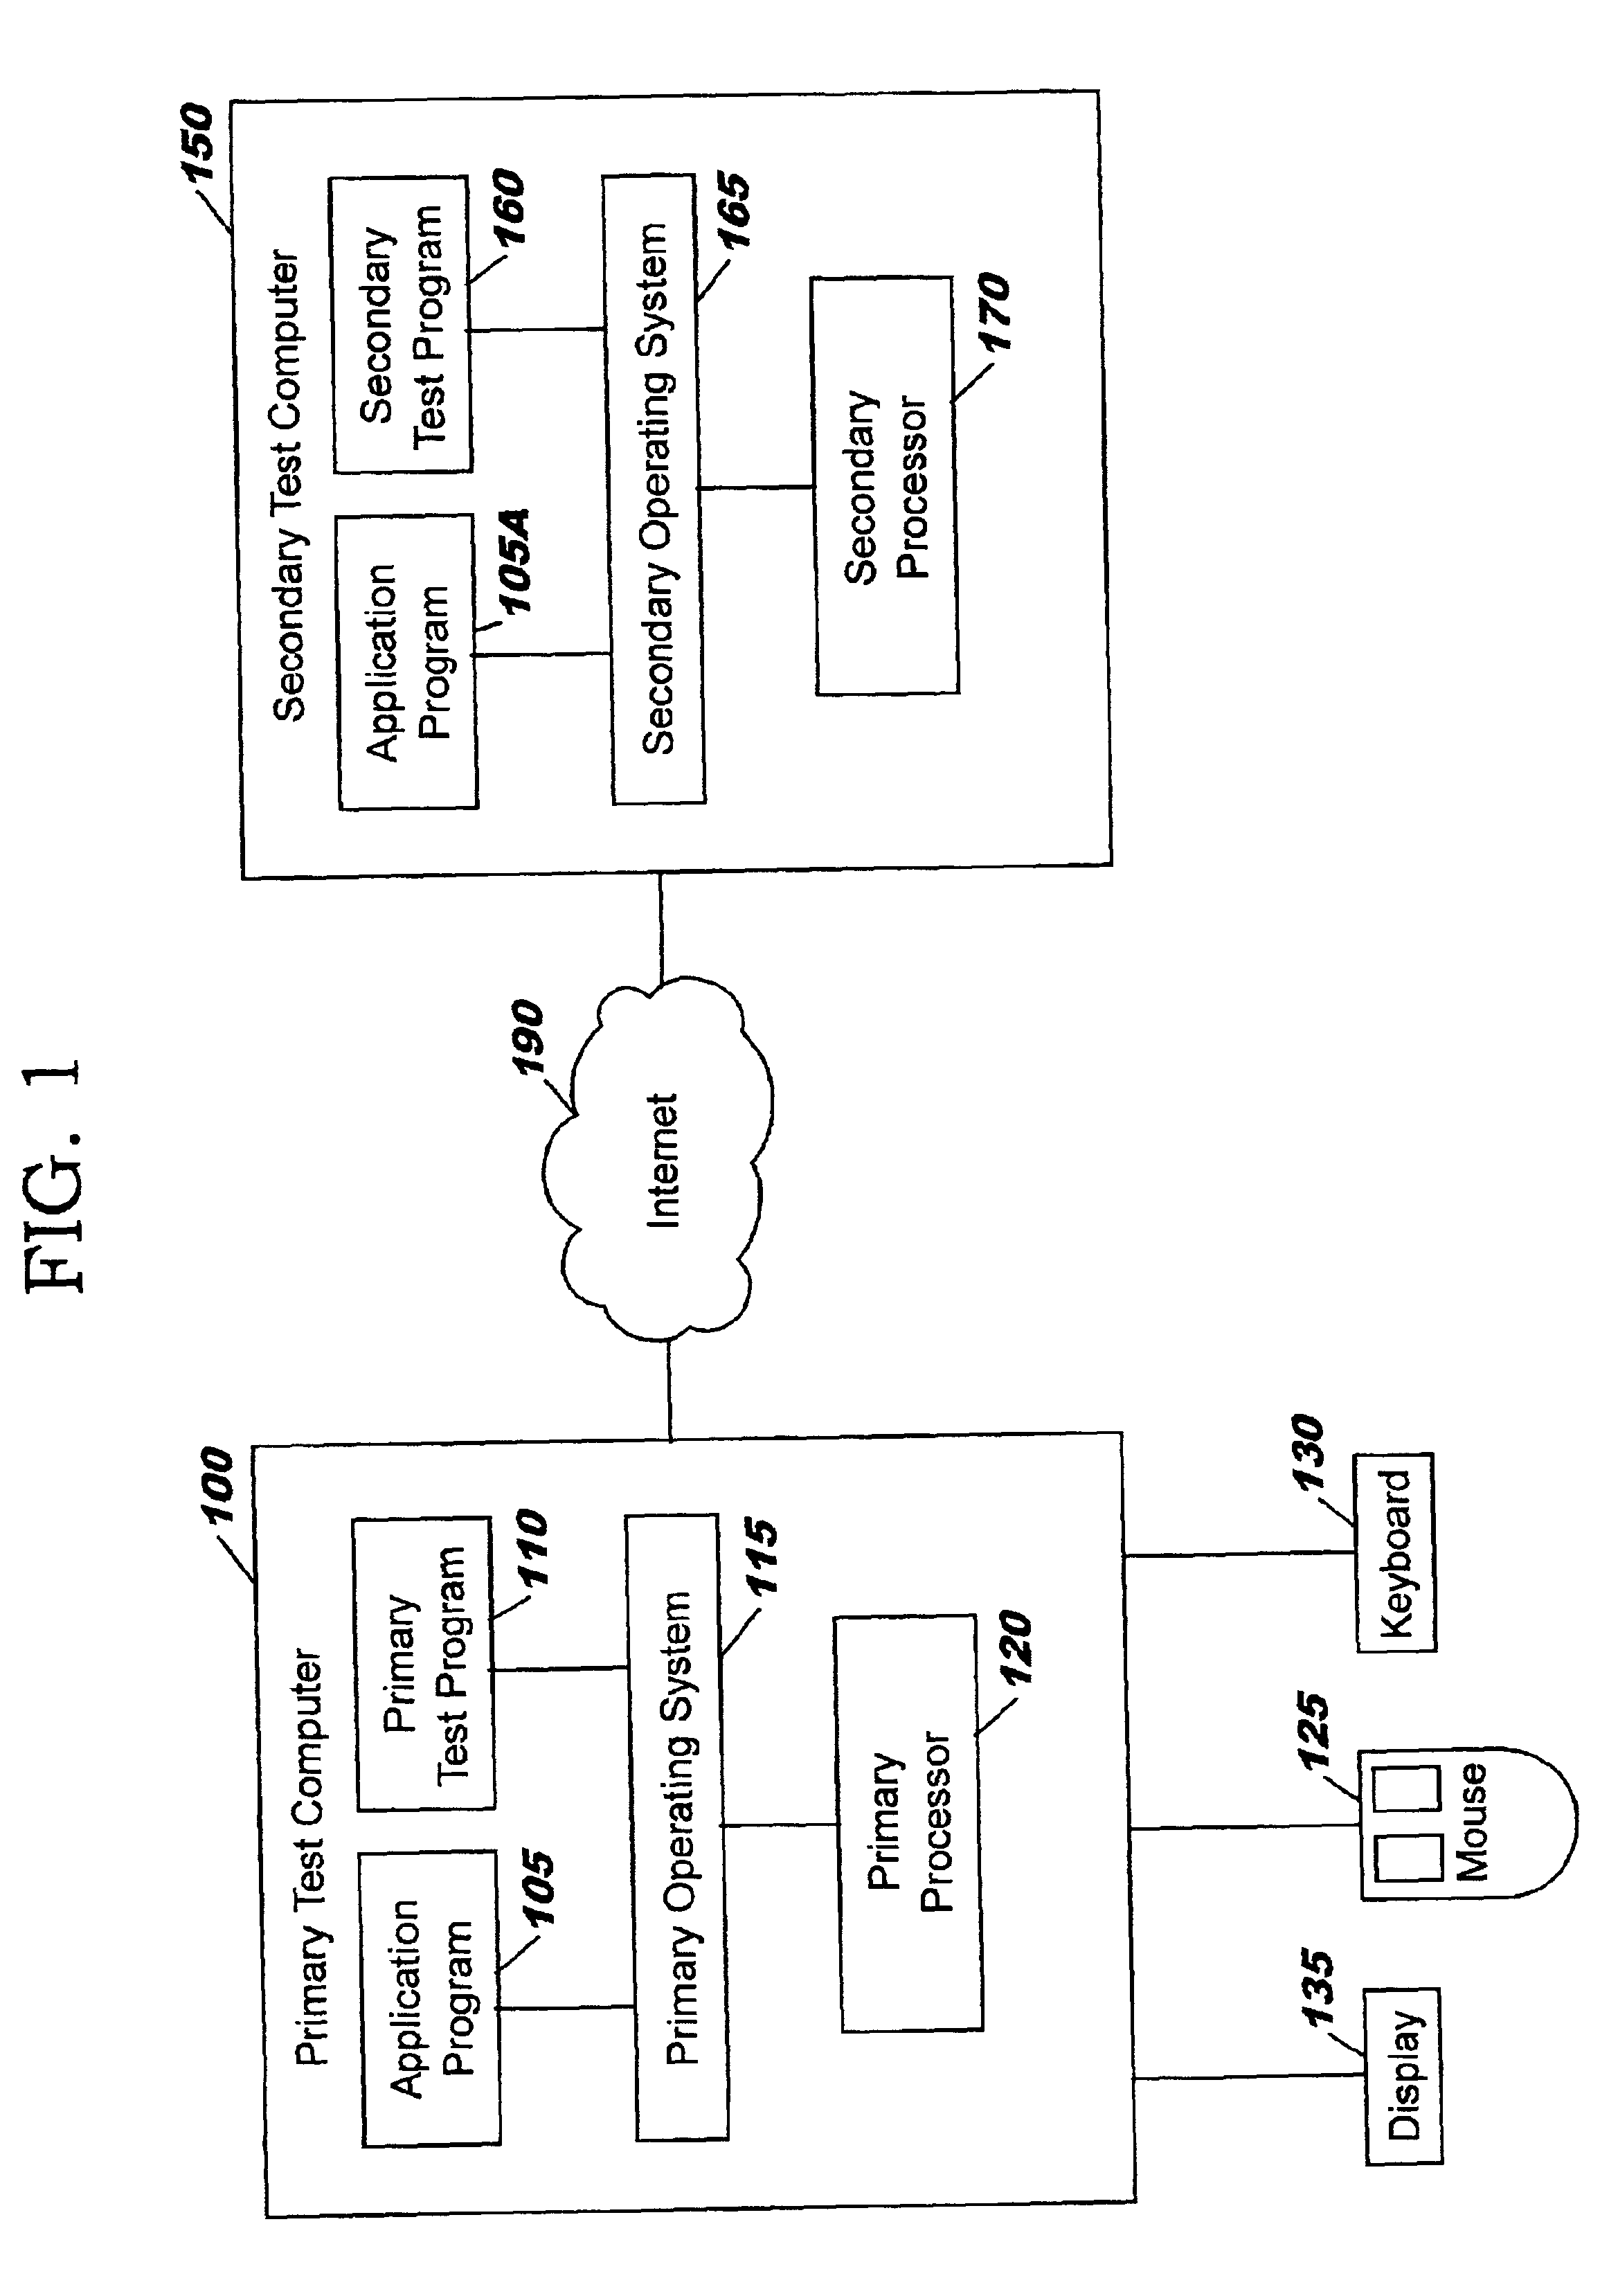 Method and computer program product for testing application program software